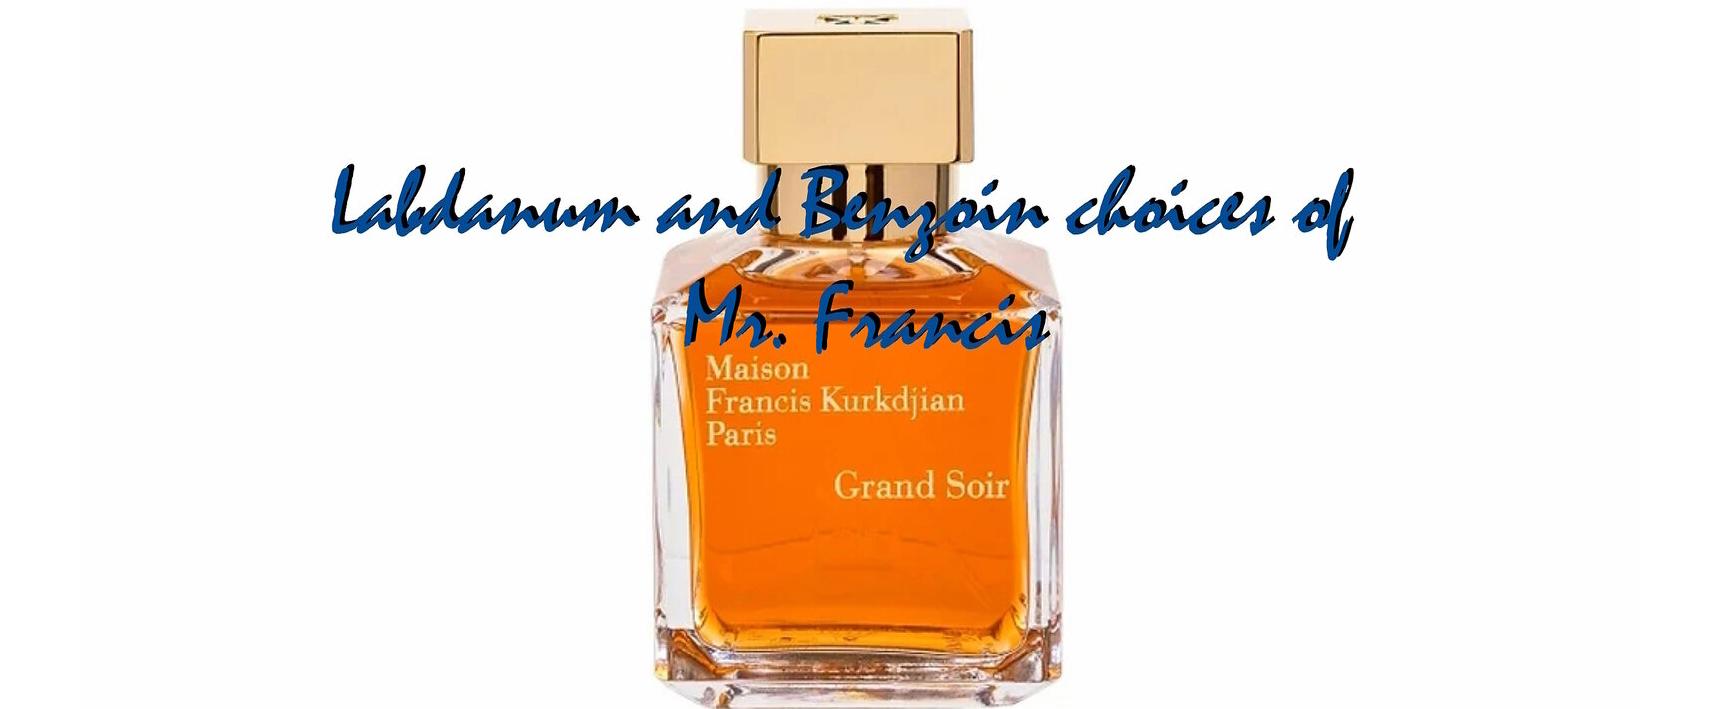 The Labdanum and Benzoin choices of Mr. Francis 